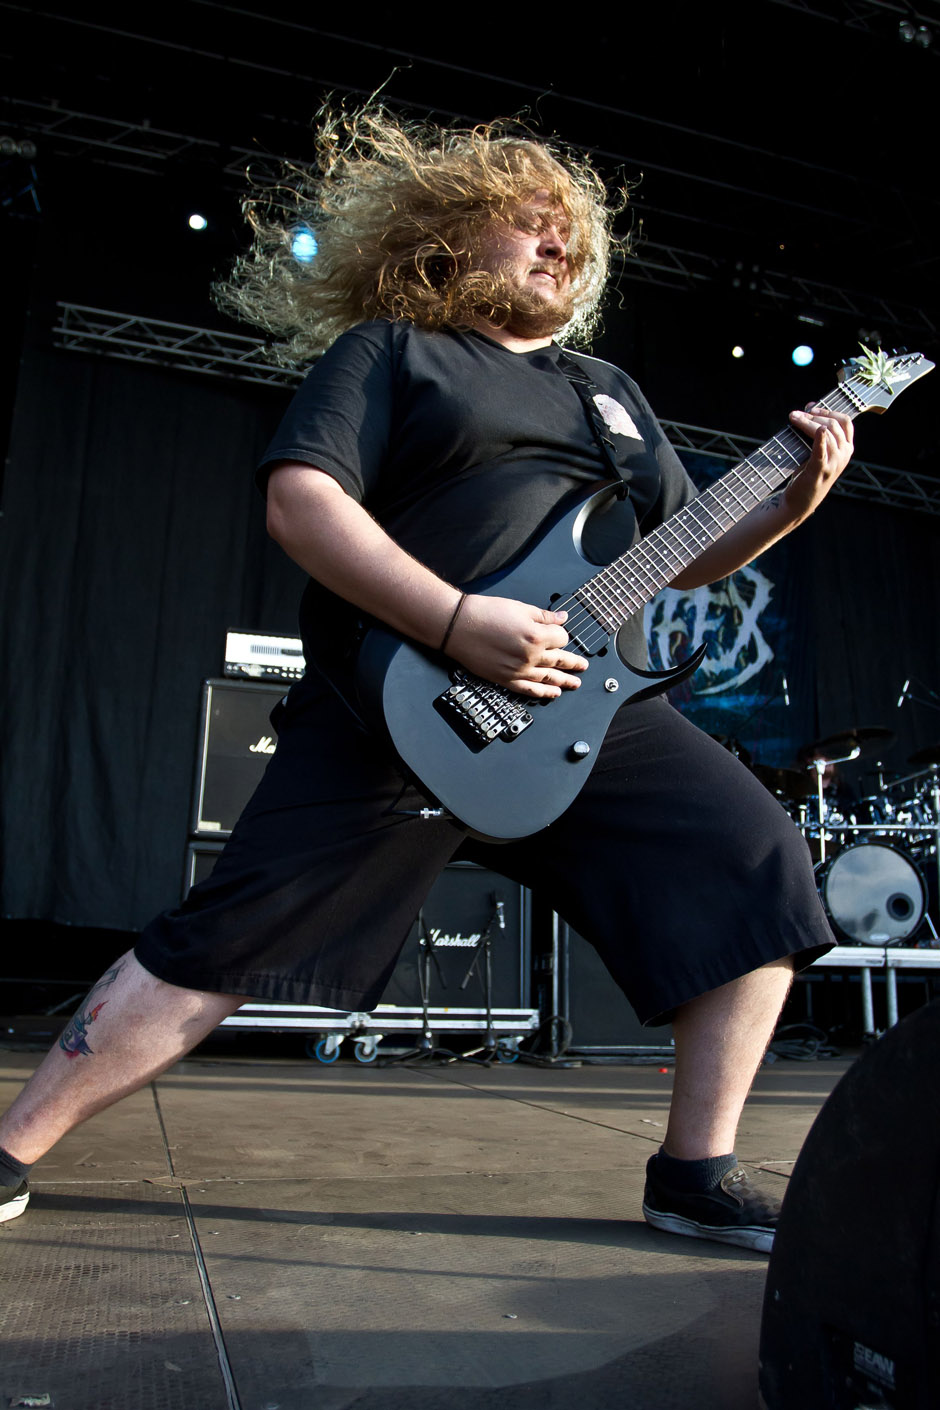 Carnifex live, Extremefest 2012 in Hünxe